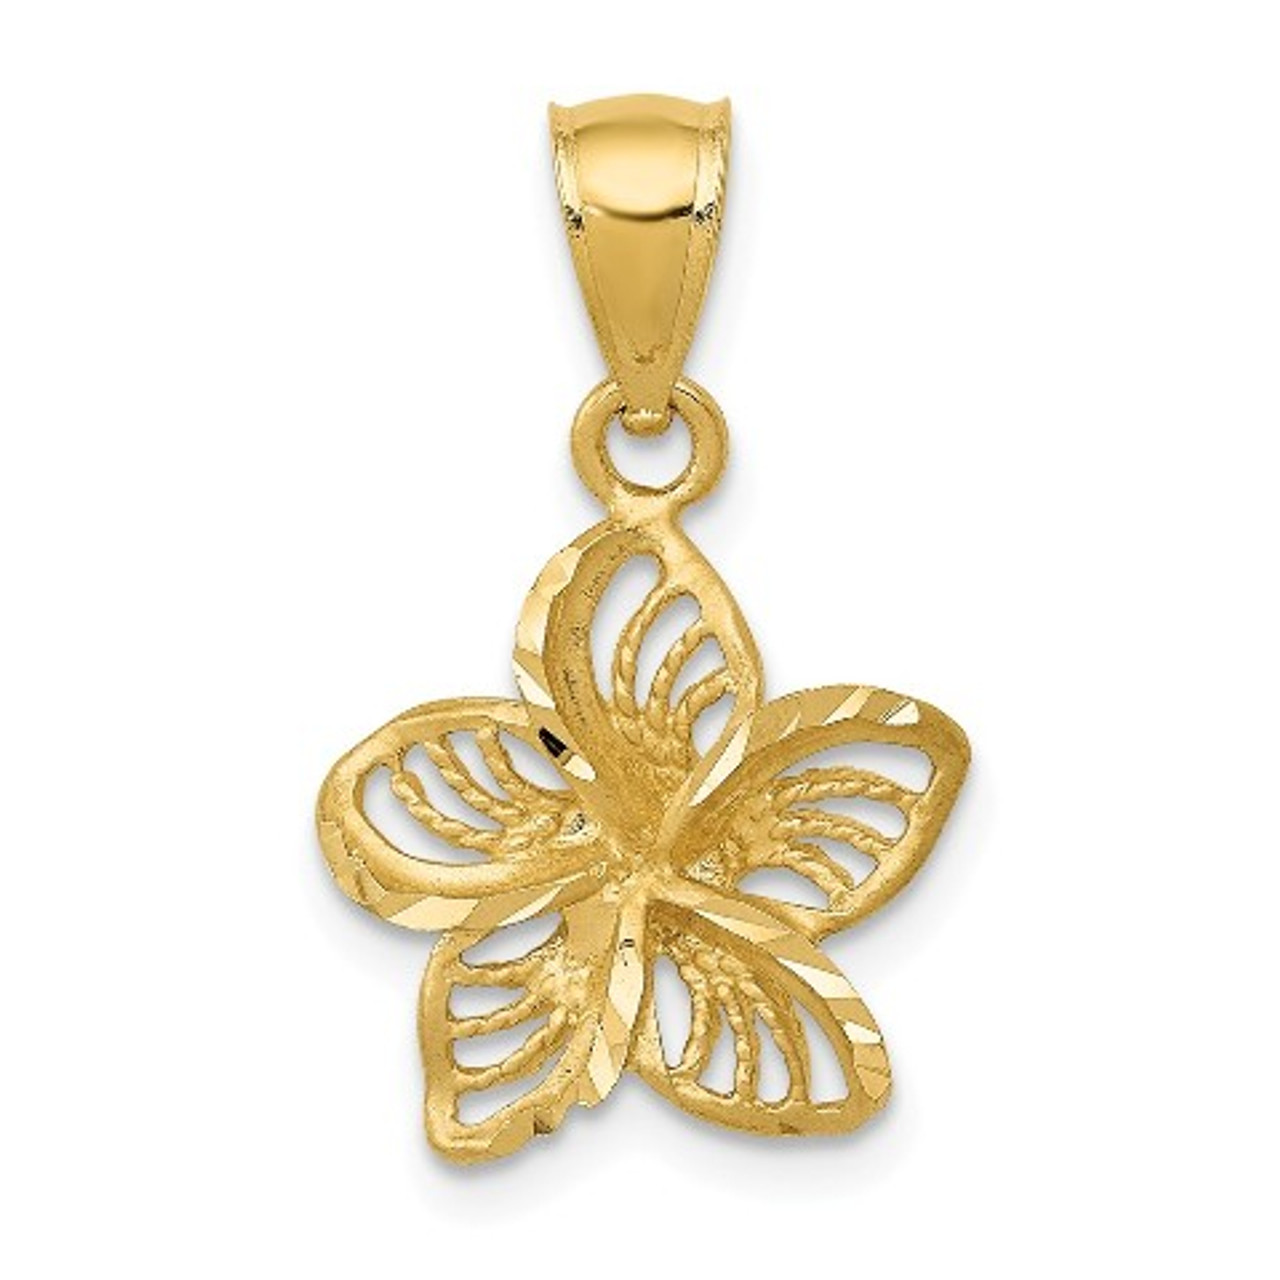 Plumeria Pendant in Gold with Diamond - 20mm – Maui Divers Jewelry